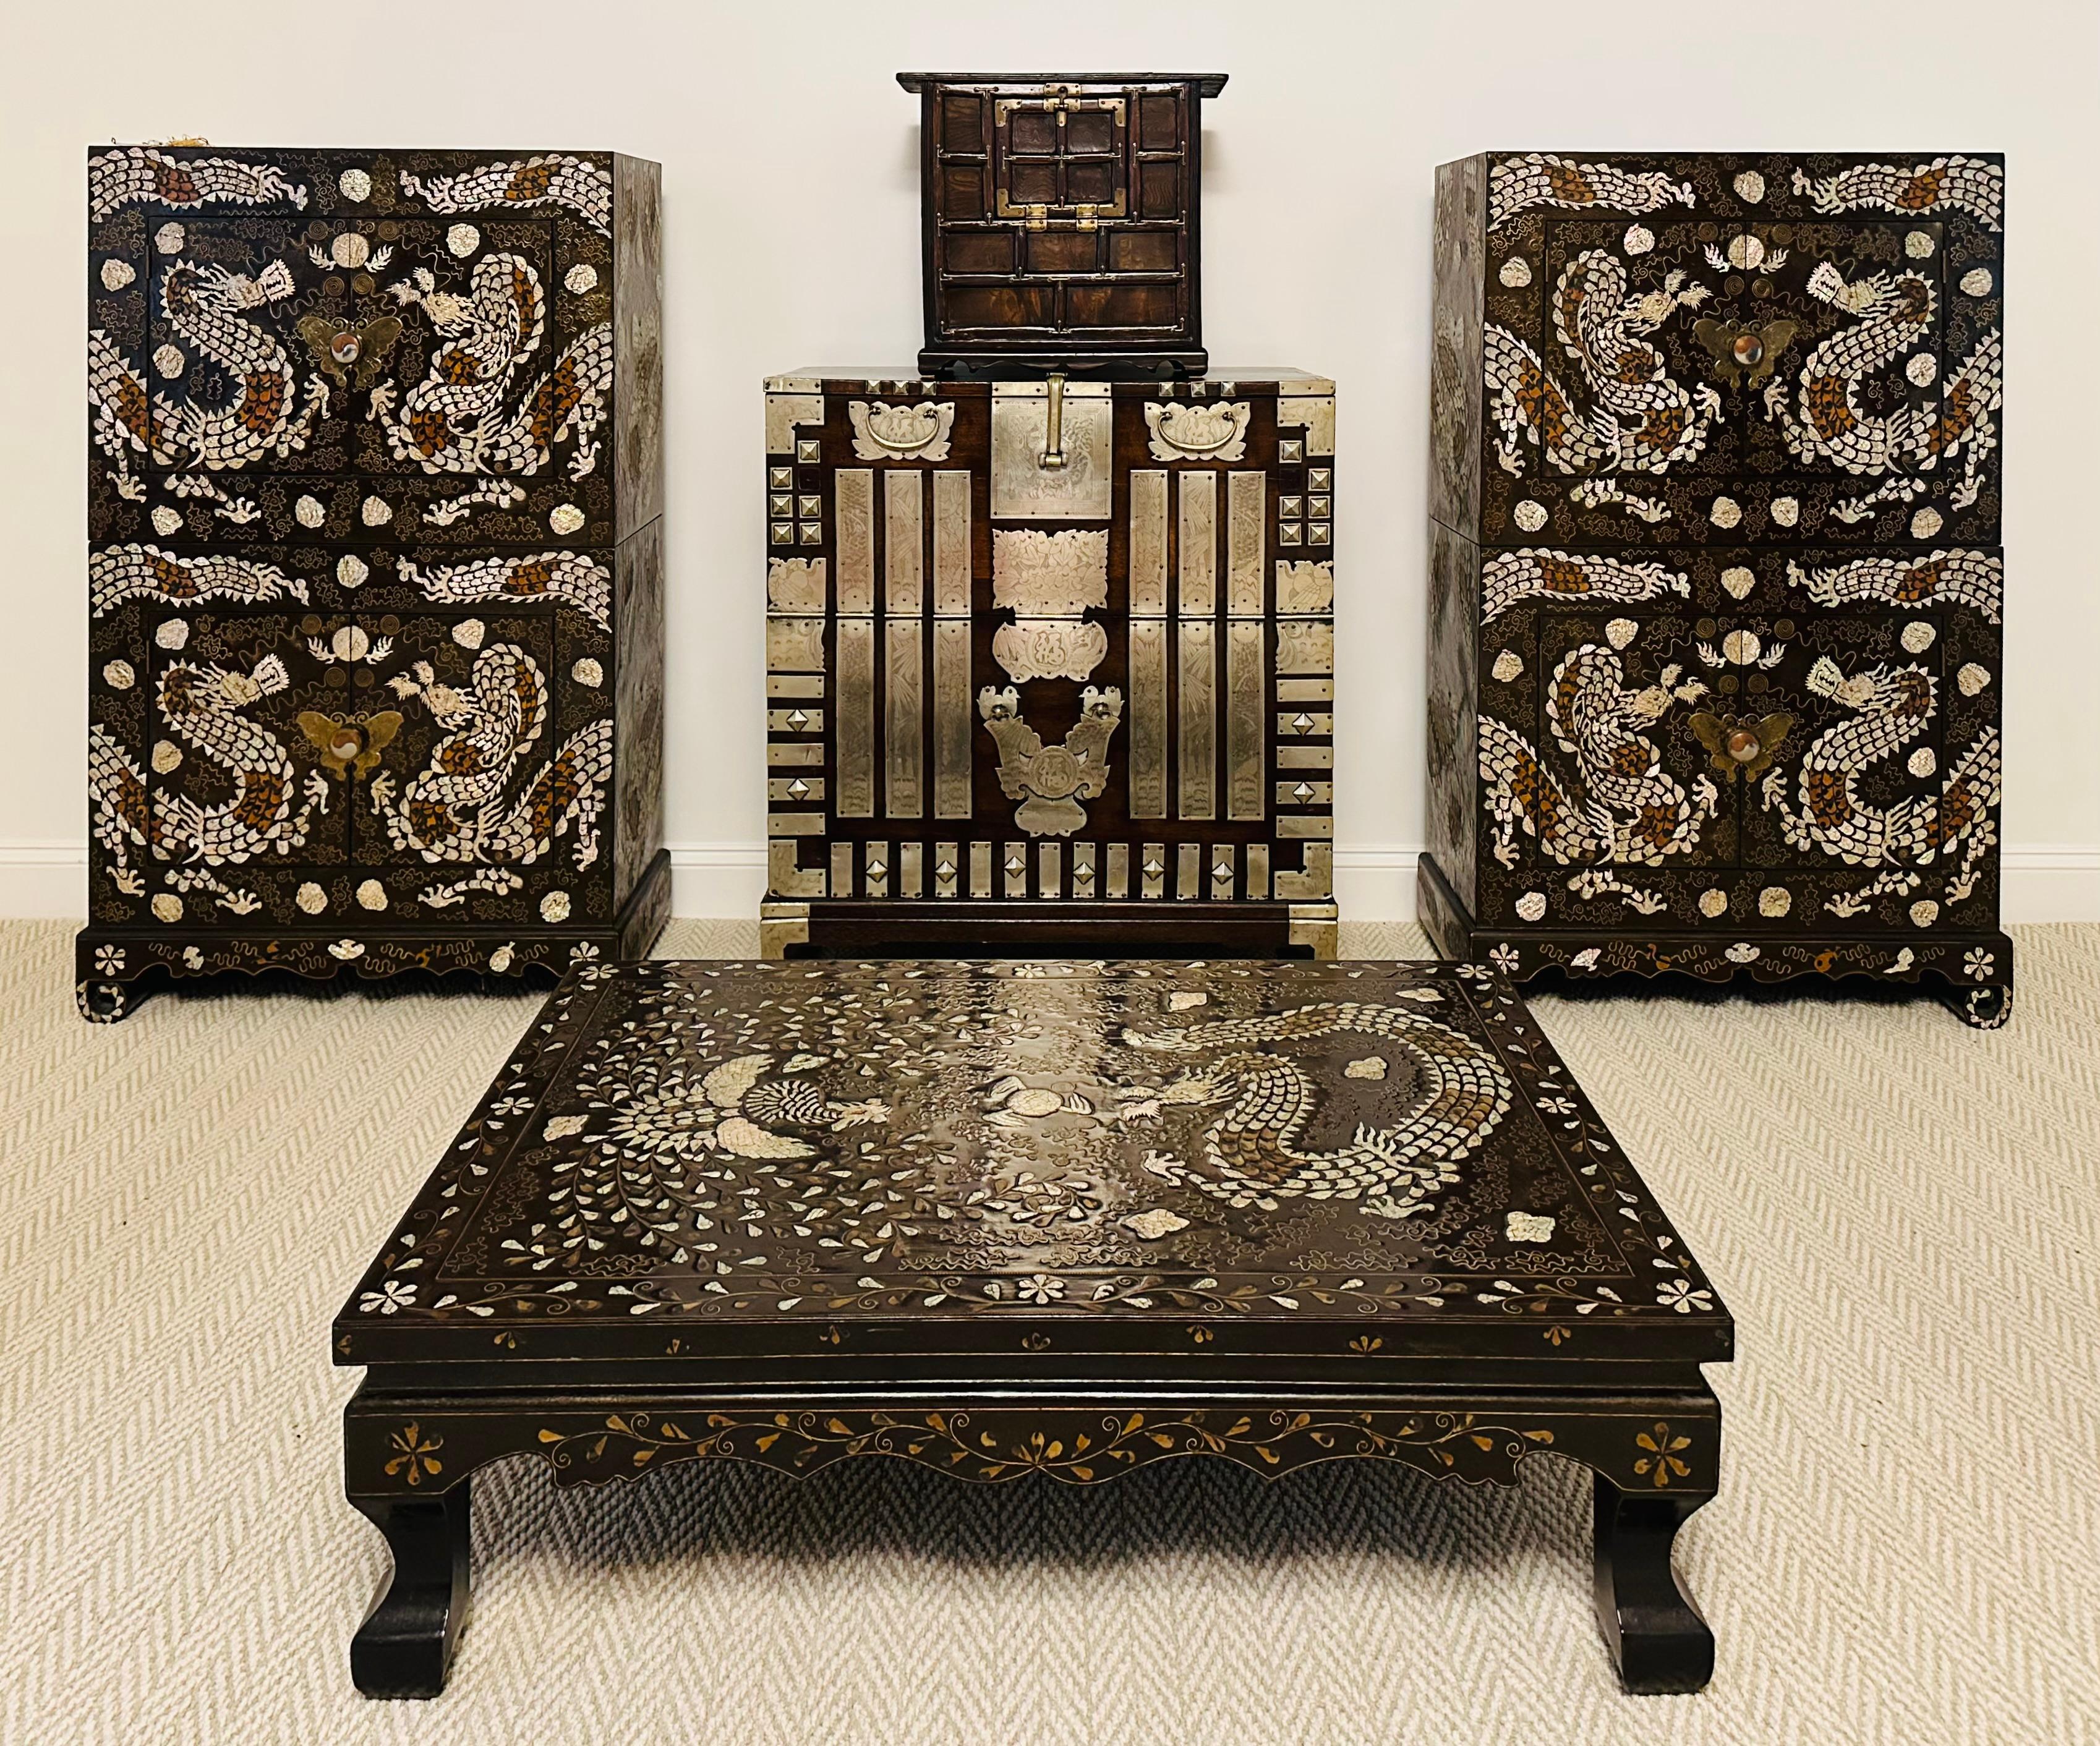 A fine pair of two-tier stacking cabinets, known as Nong in Korean, circa early 20th century (Korean Empire to Japanese Colonial Period). The square cabinet each is fitted with a pair of single panel doors opens to ample storage. The lower cabinet